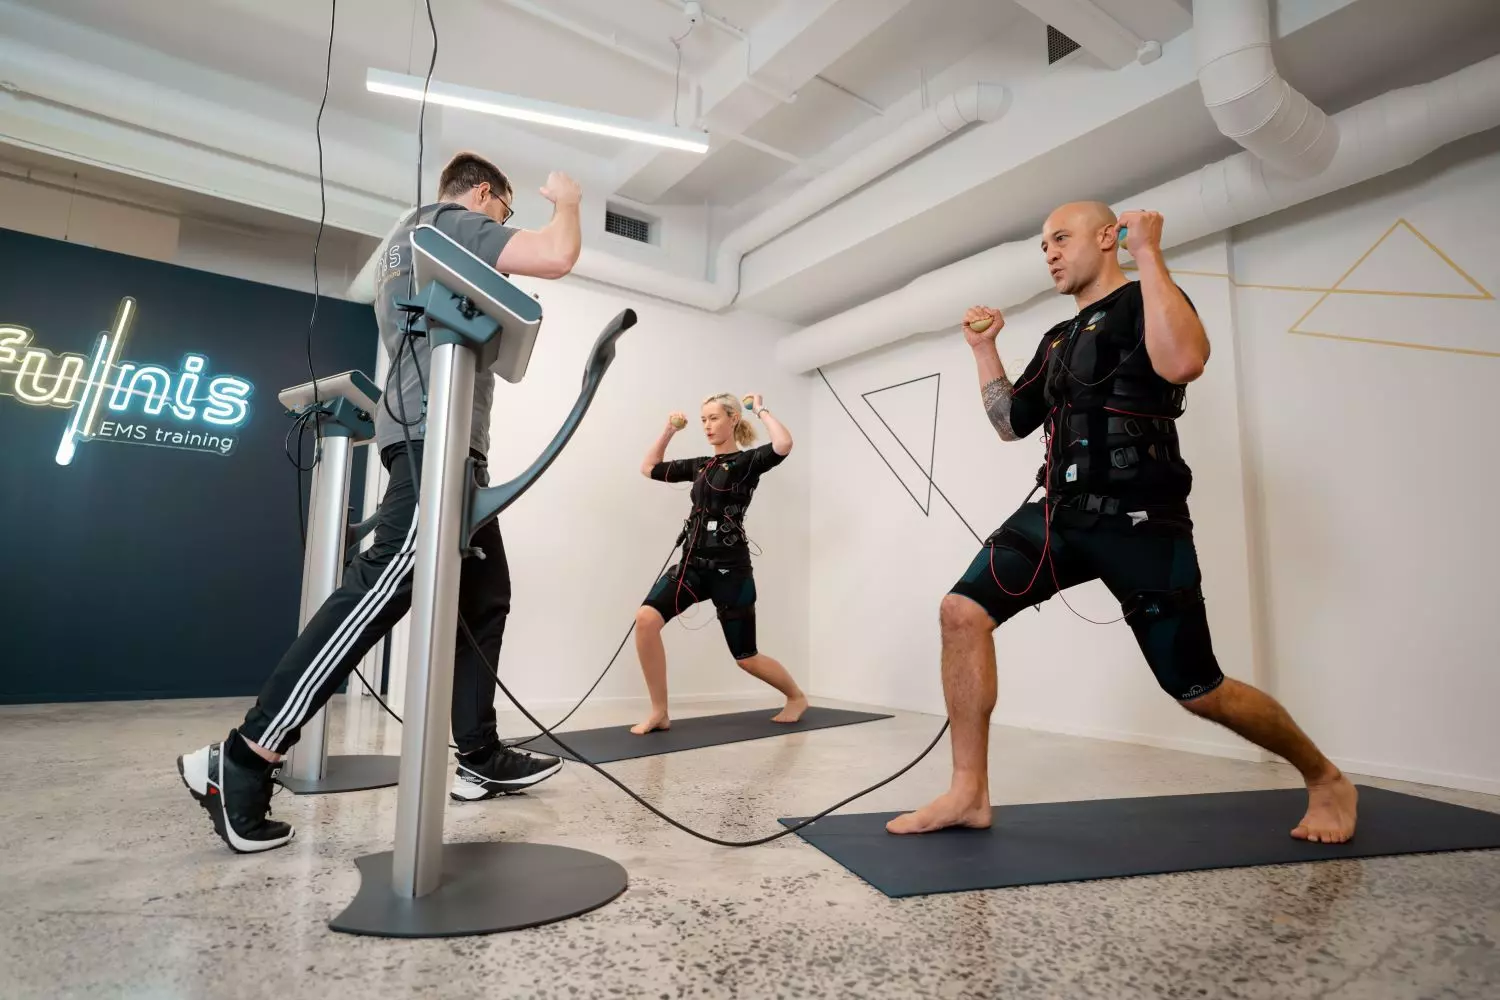 Electrical muscle stimulation studio provides low-impact workouts